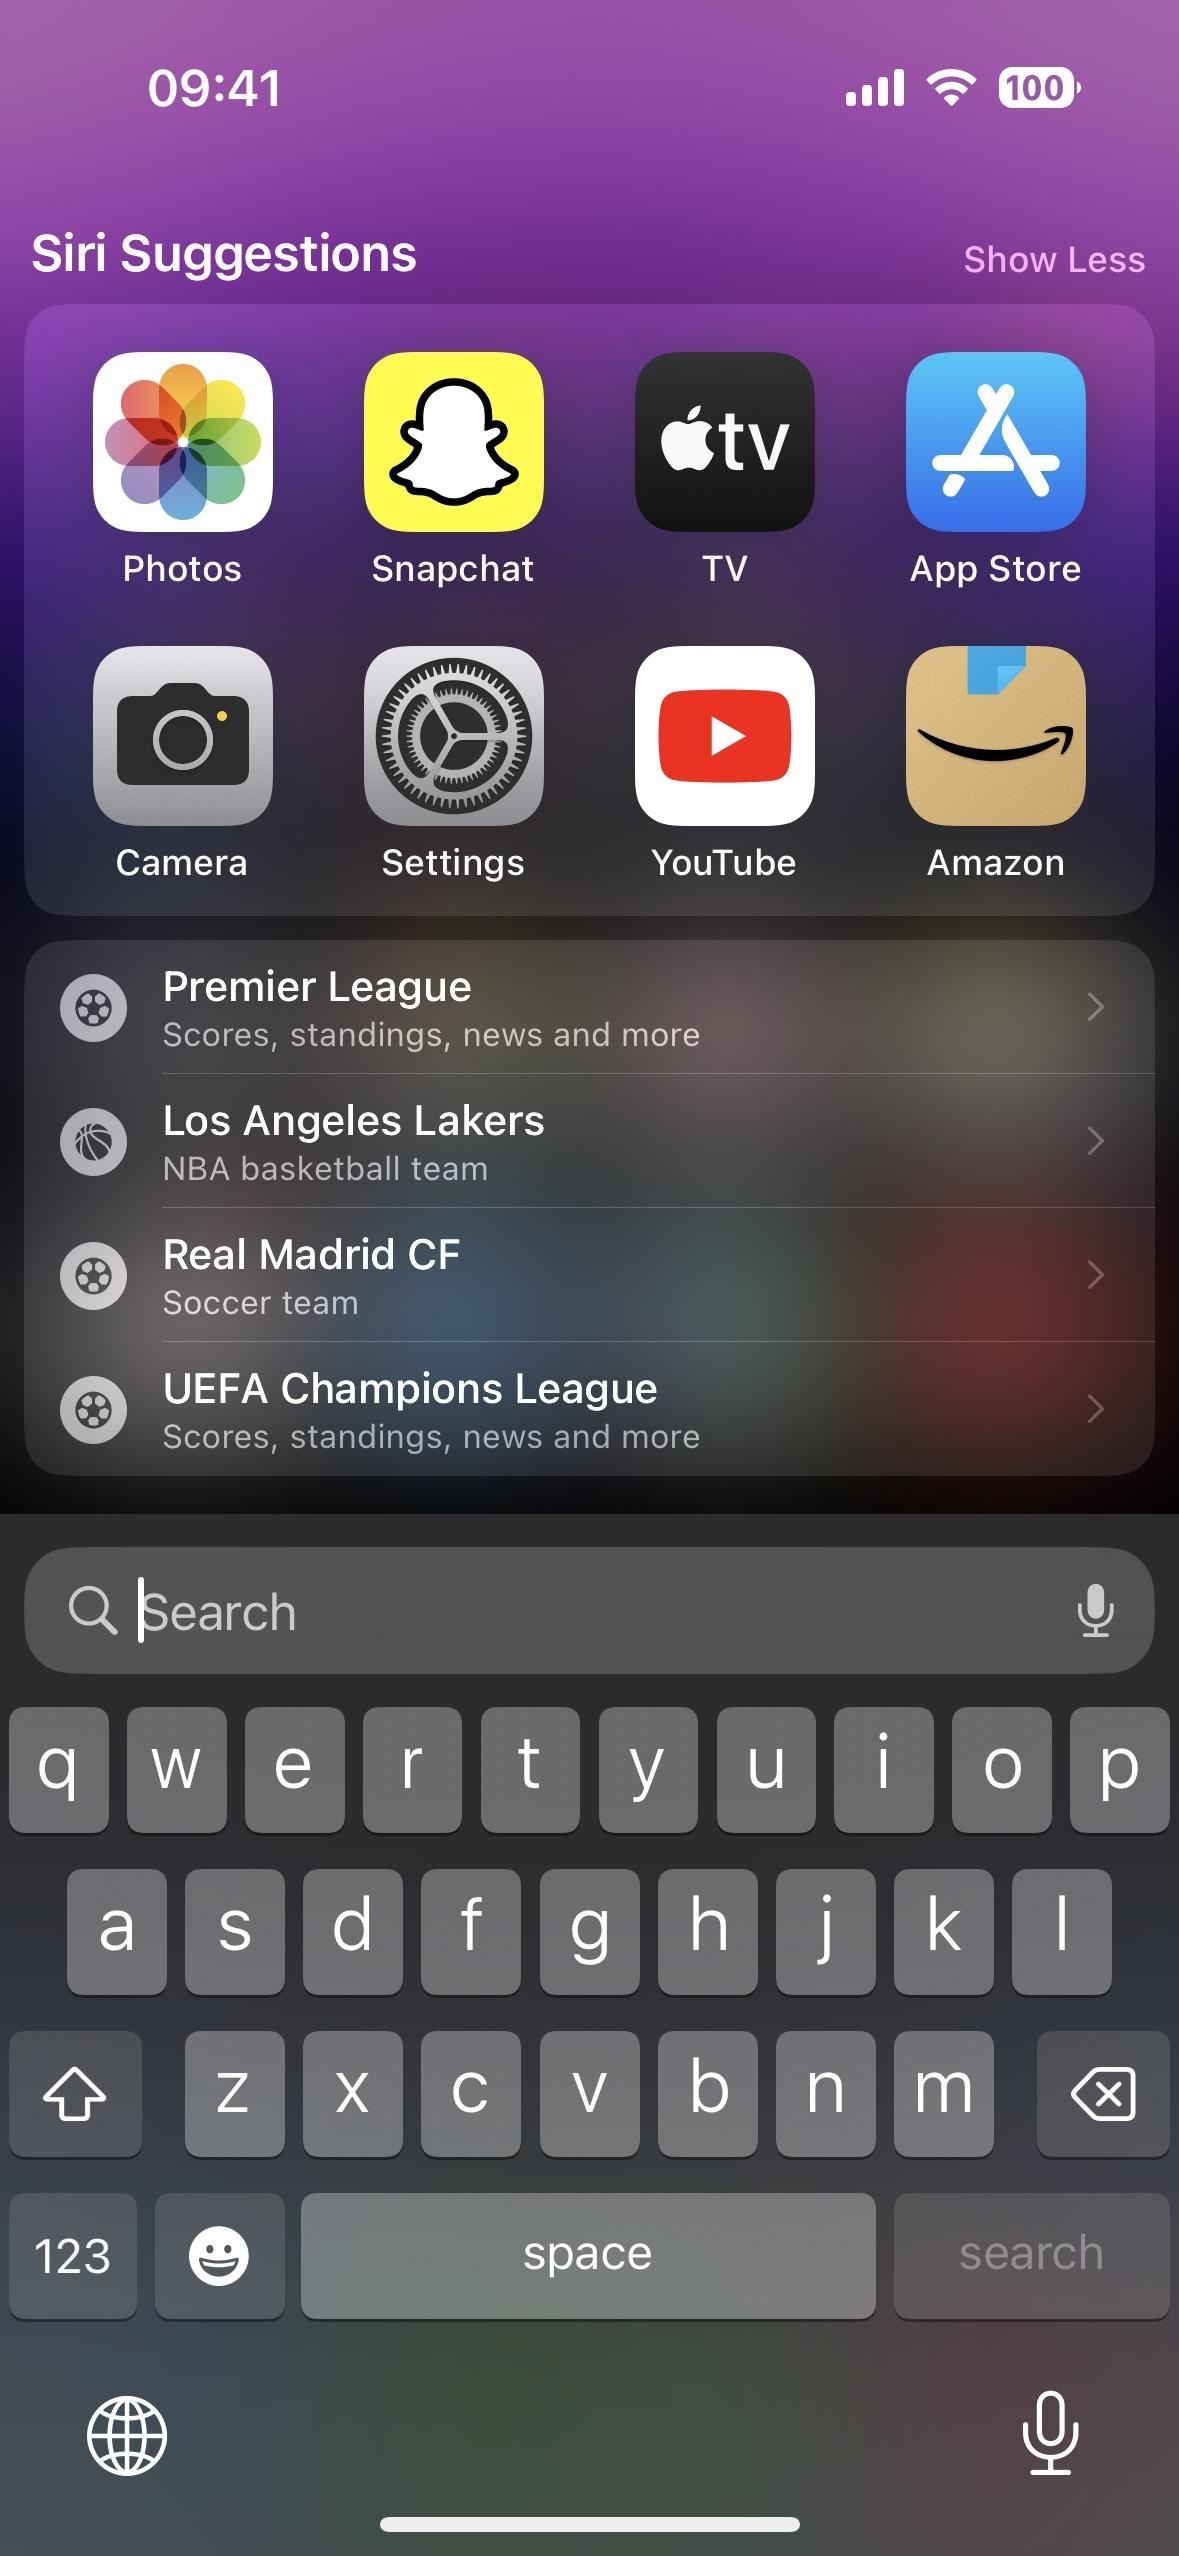 These new updates make Spotlight search even more useful on iPhone